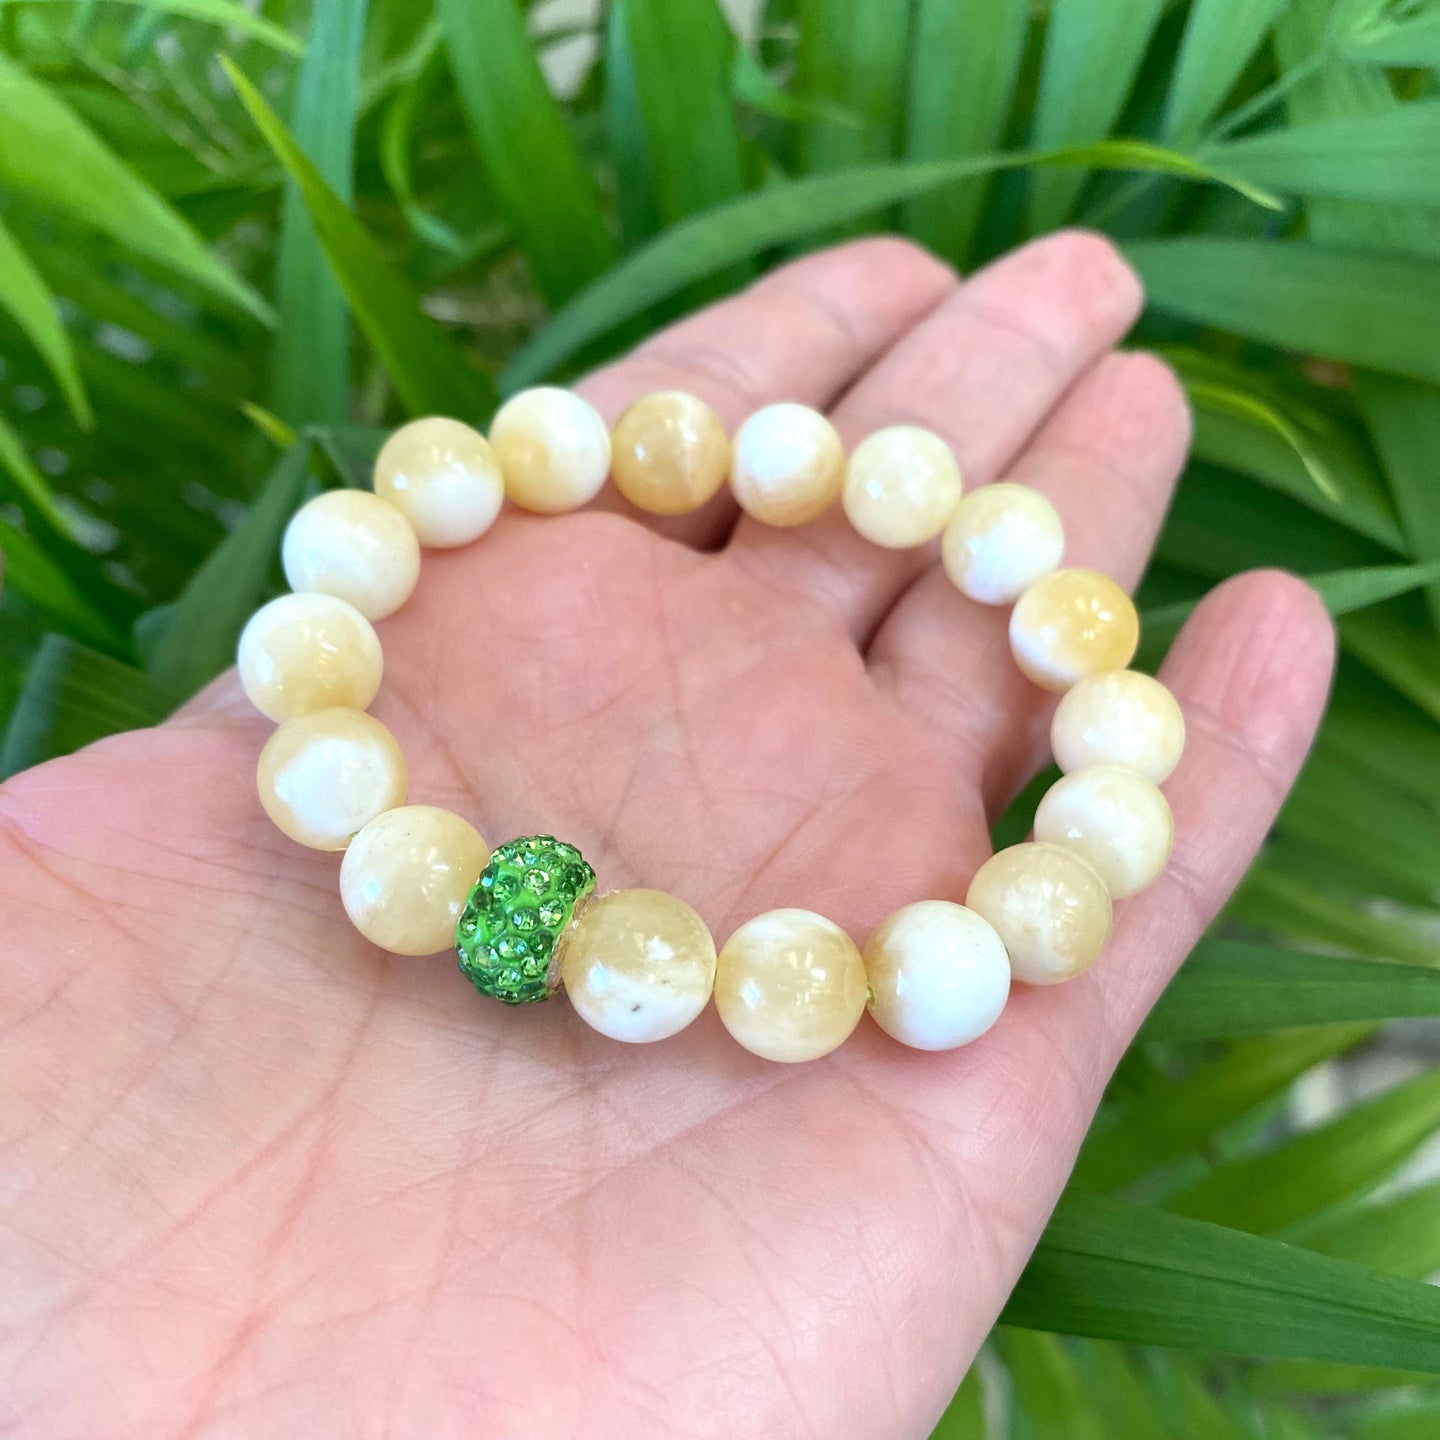 Honey Jade Stretch Bracelet with Green Rhinestones Pave Bead in Middle